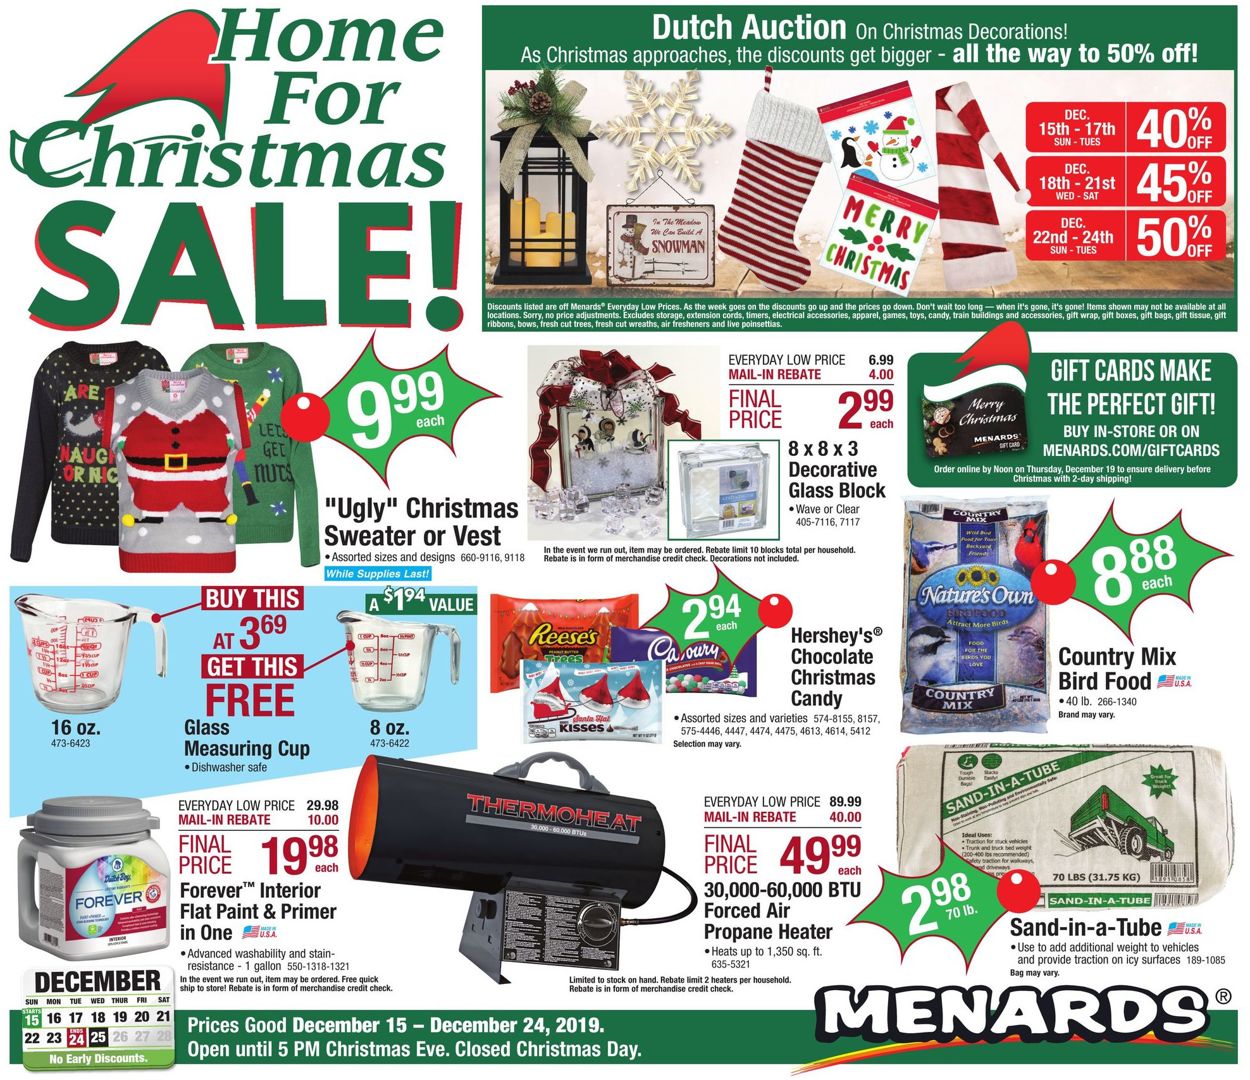 Menards - Christmas Sale Ad 2019 Current weekly ad 12/15 - 12/24/2019 [3] - www.bagssaleusa.com